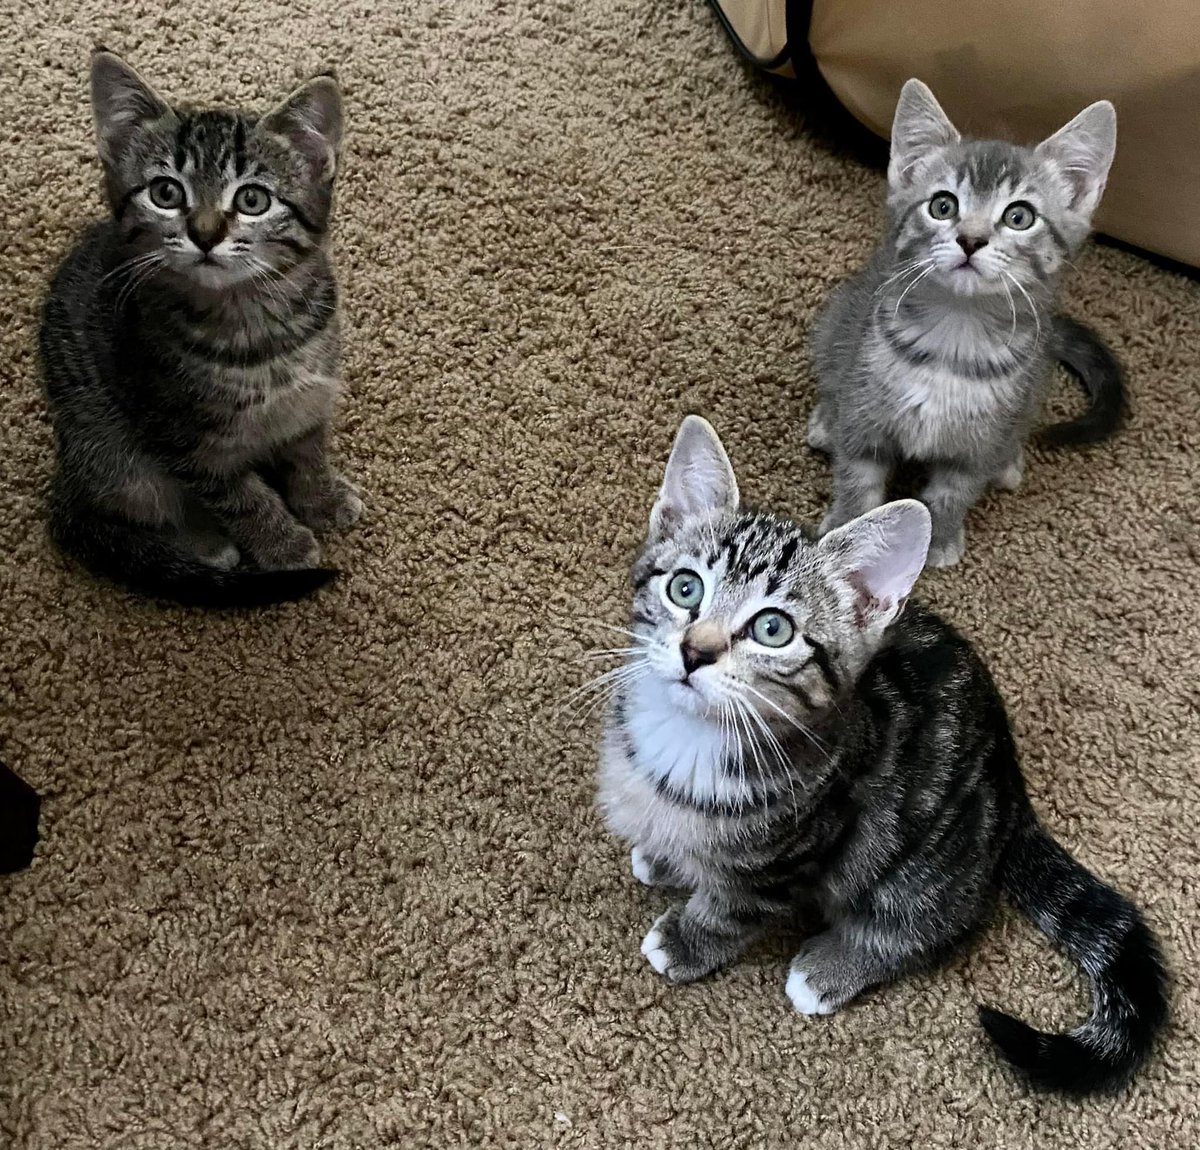 Happy #WhiskerWednesday!
Hissy, Sissy, and Missy are 3 of 7 #spicy jalapeños, I mean #kittens, that are being taught humans aren’t all bad. 
Showing them love and patience until they trust again. 💗☀️
 ItsieBitsieRescue.org
#savinglives #fosters2024 #gratitude